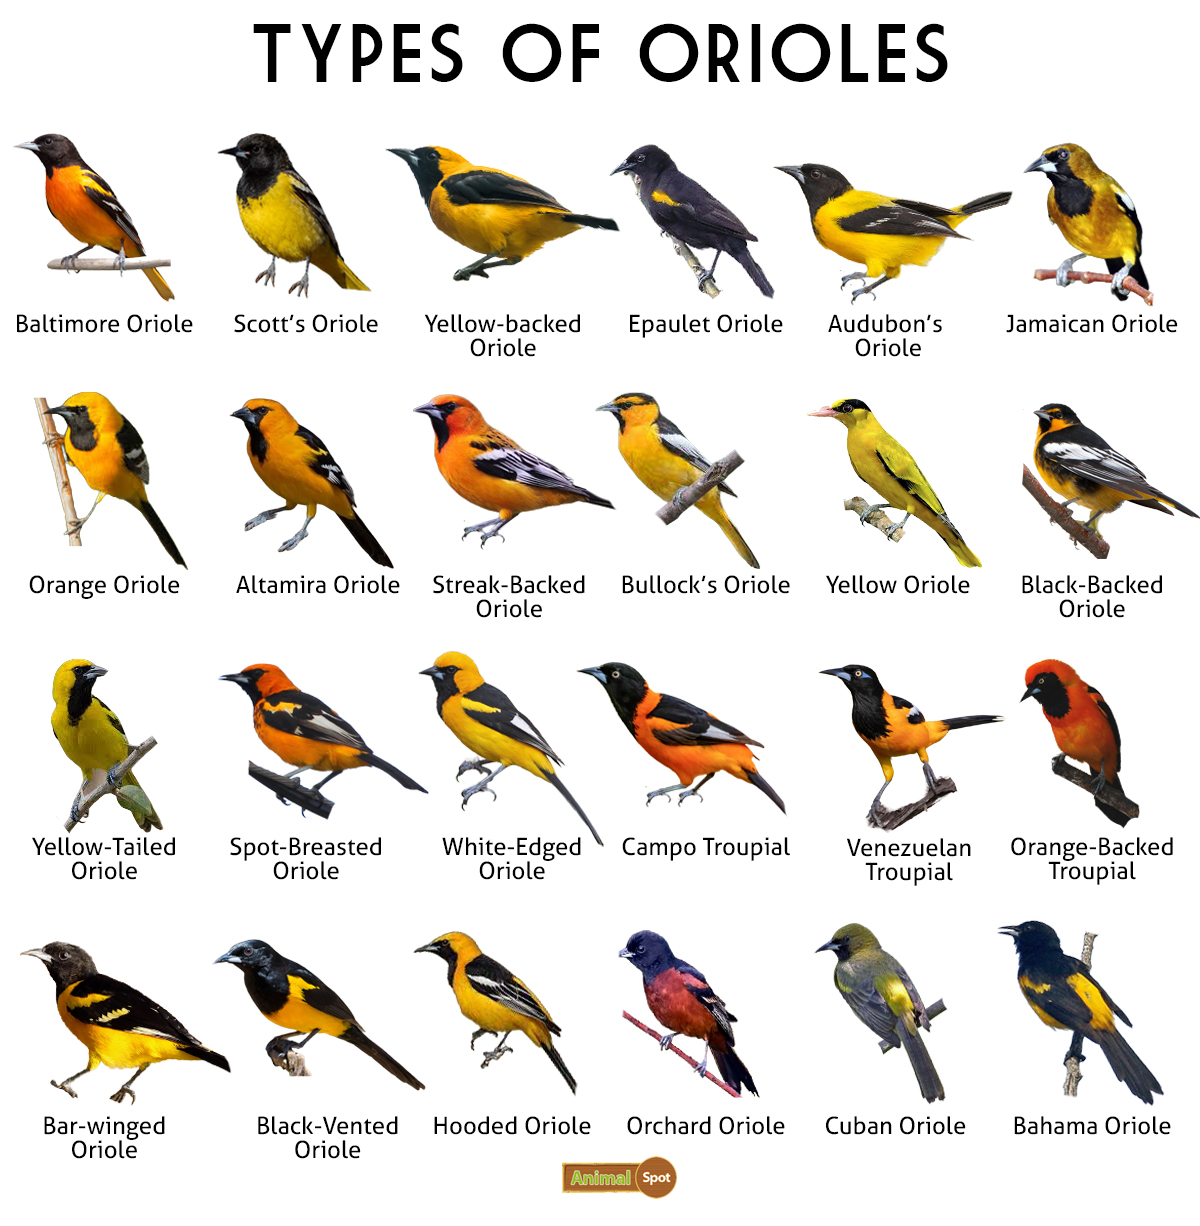 Oriole (New World) Facts, Types, Diet, Reproduction